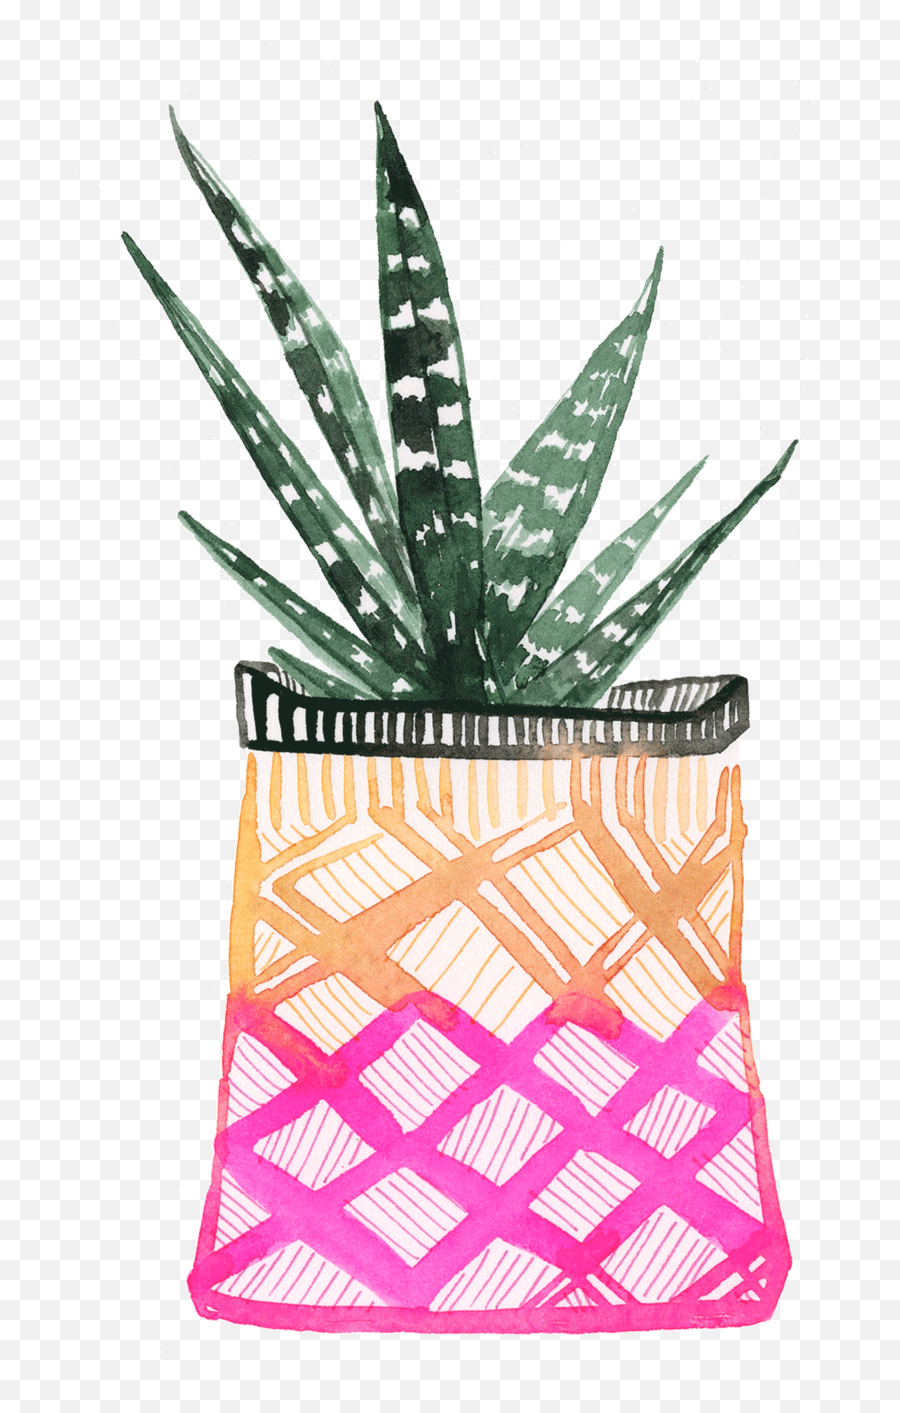 Download Planters - Thumbnail Full Size Png Image Pngkit Agave,Planters Png